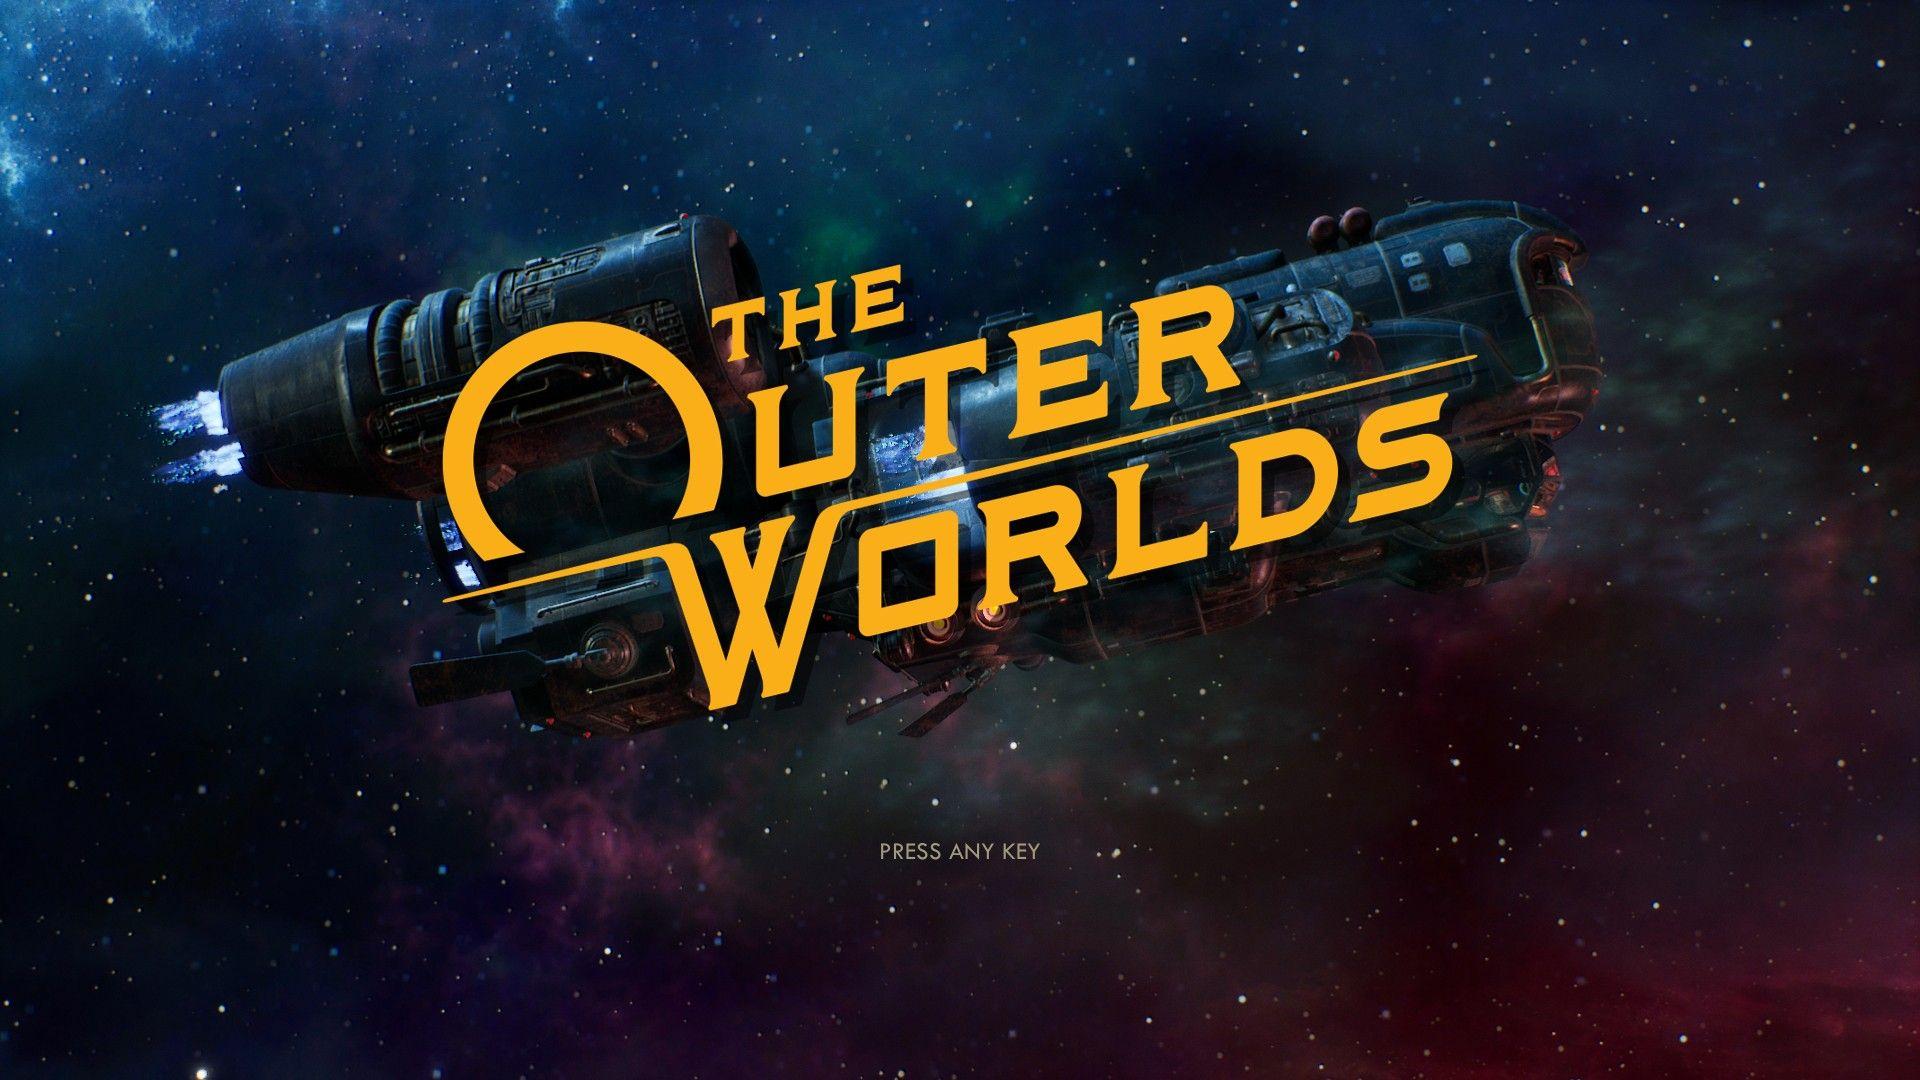 for iphone download The Outer Worlds free